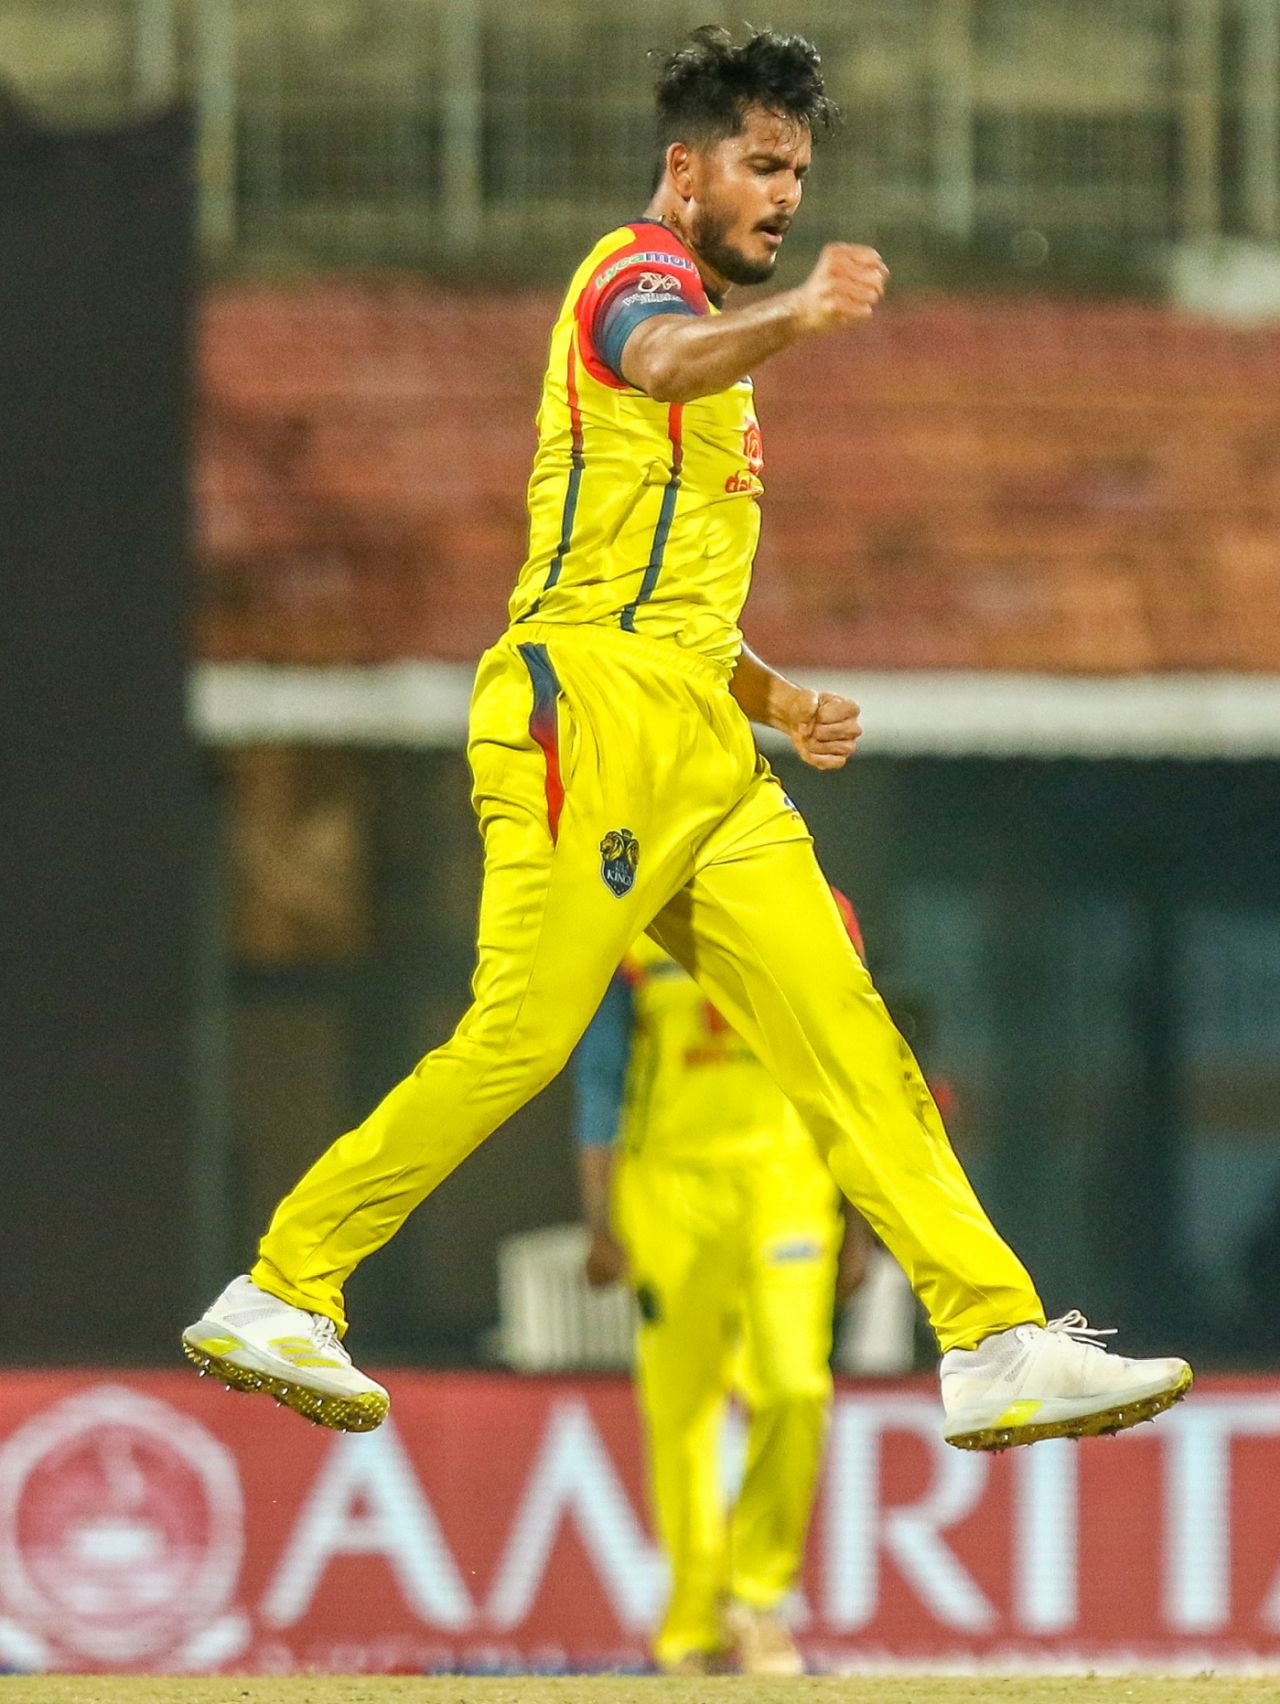 K Vignesh has found form in the TNPL after having recovered from Covid-19, Lyca Kovai Kings vs Ruby Trichy Warriors, TNPL 2021, Chennai, July 23, 2021